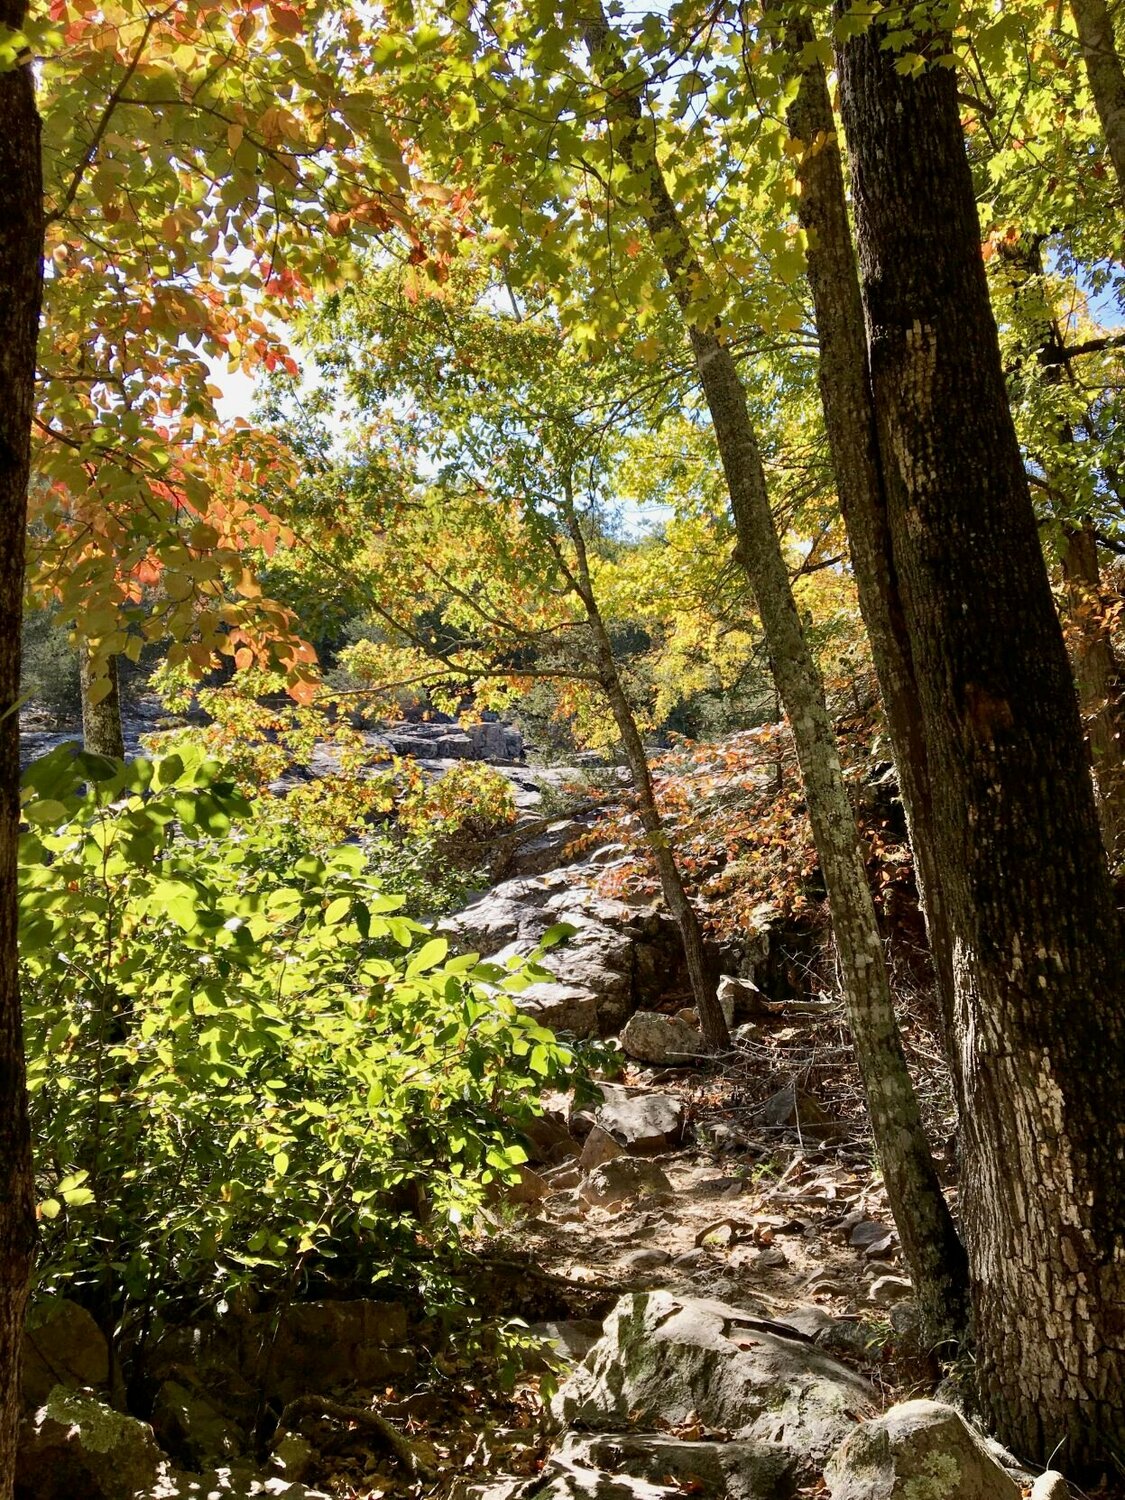 Rocky Falls is one of several hiking destinations in this year's fall hiking series within the Ozark National Scenic Riverways. Themed hikes will be guided by park rangers and held most Saturdays from Sept. 23 through Nov. 4.